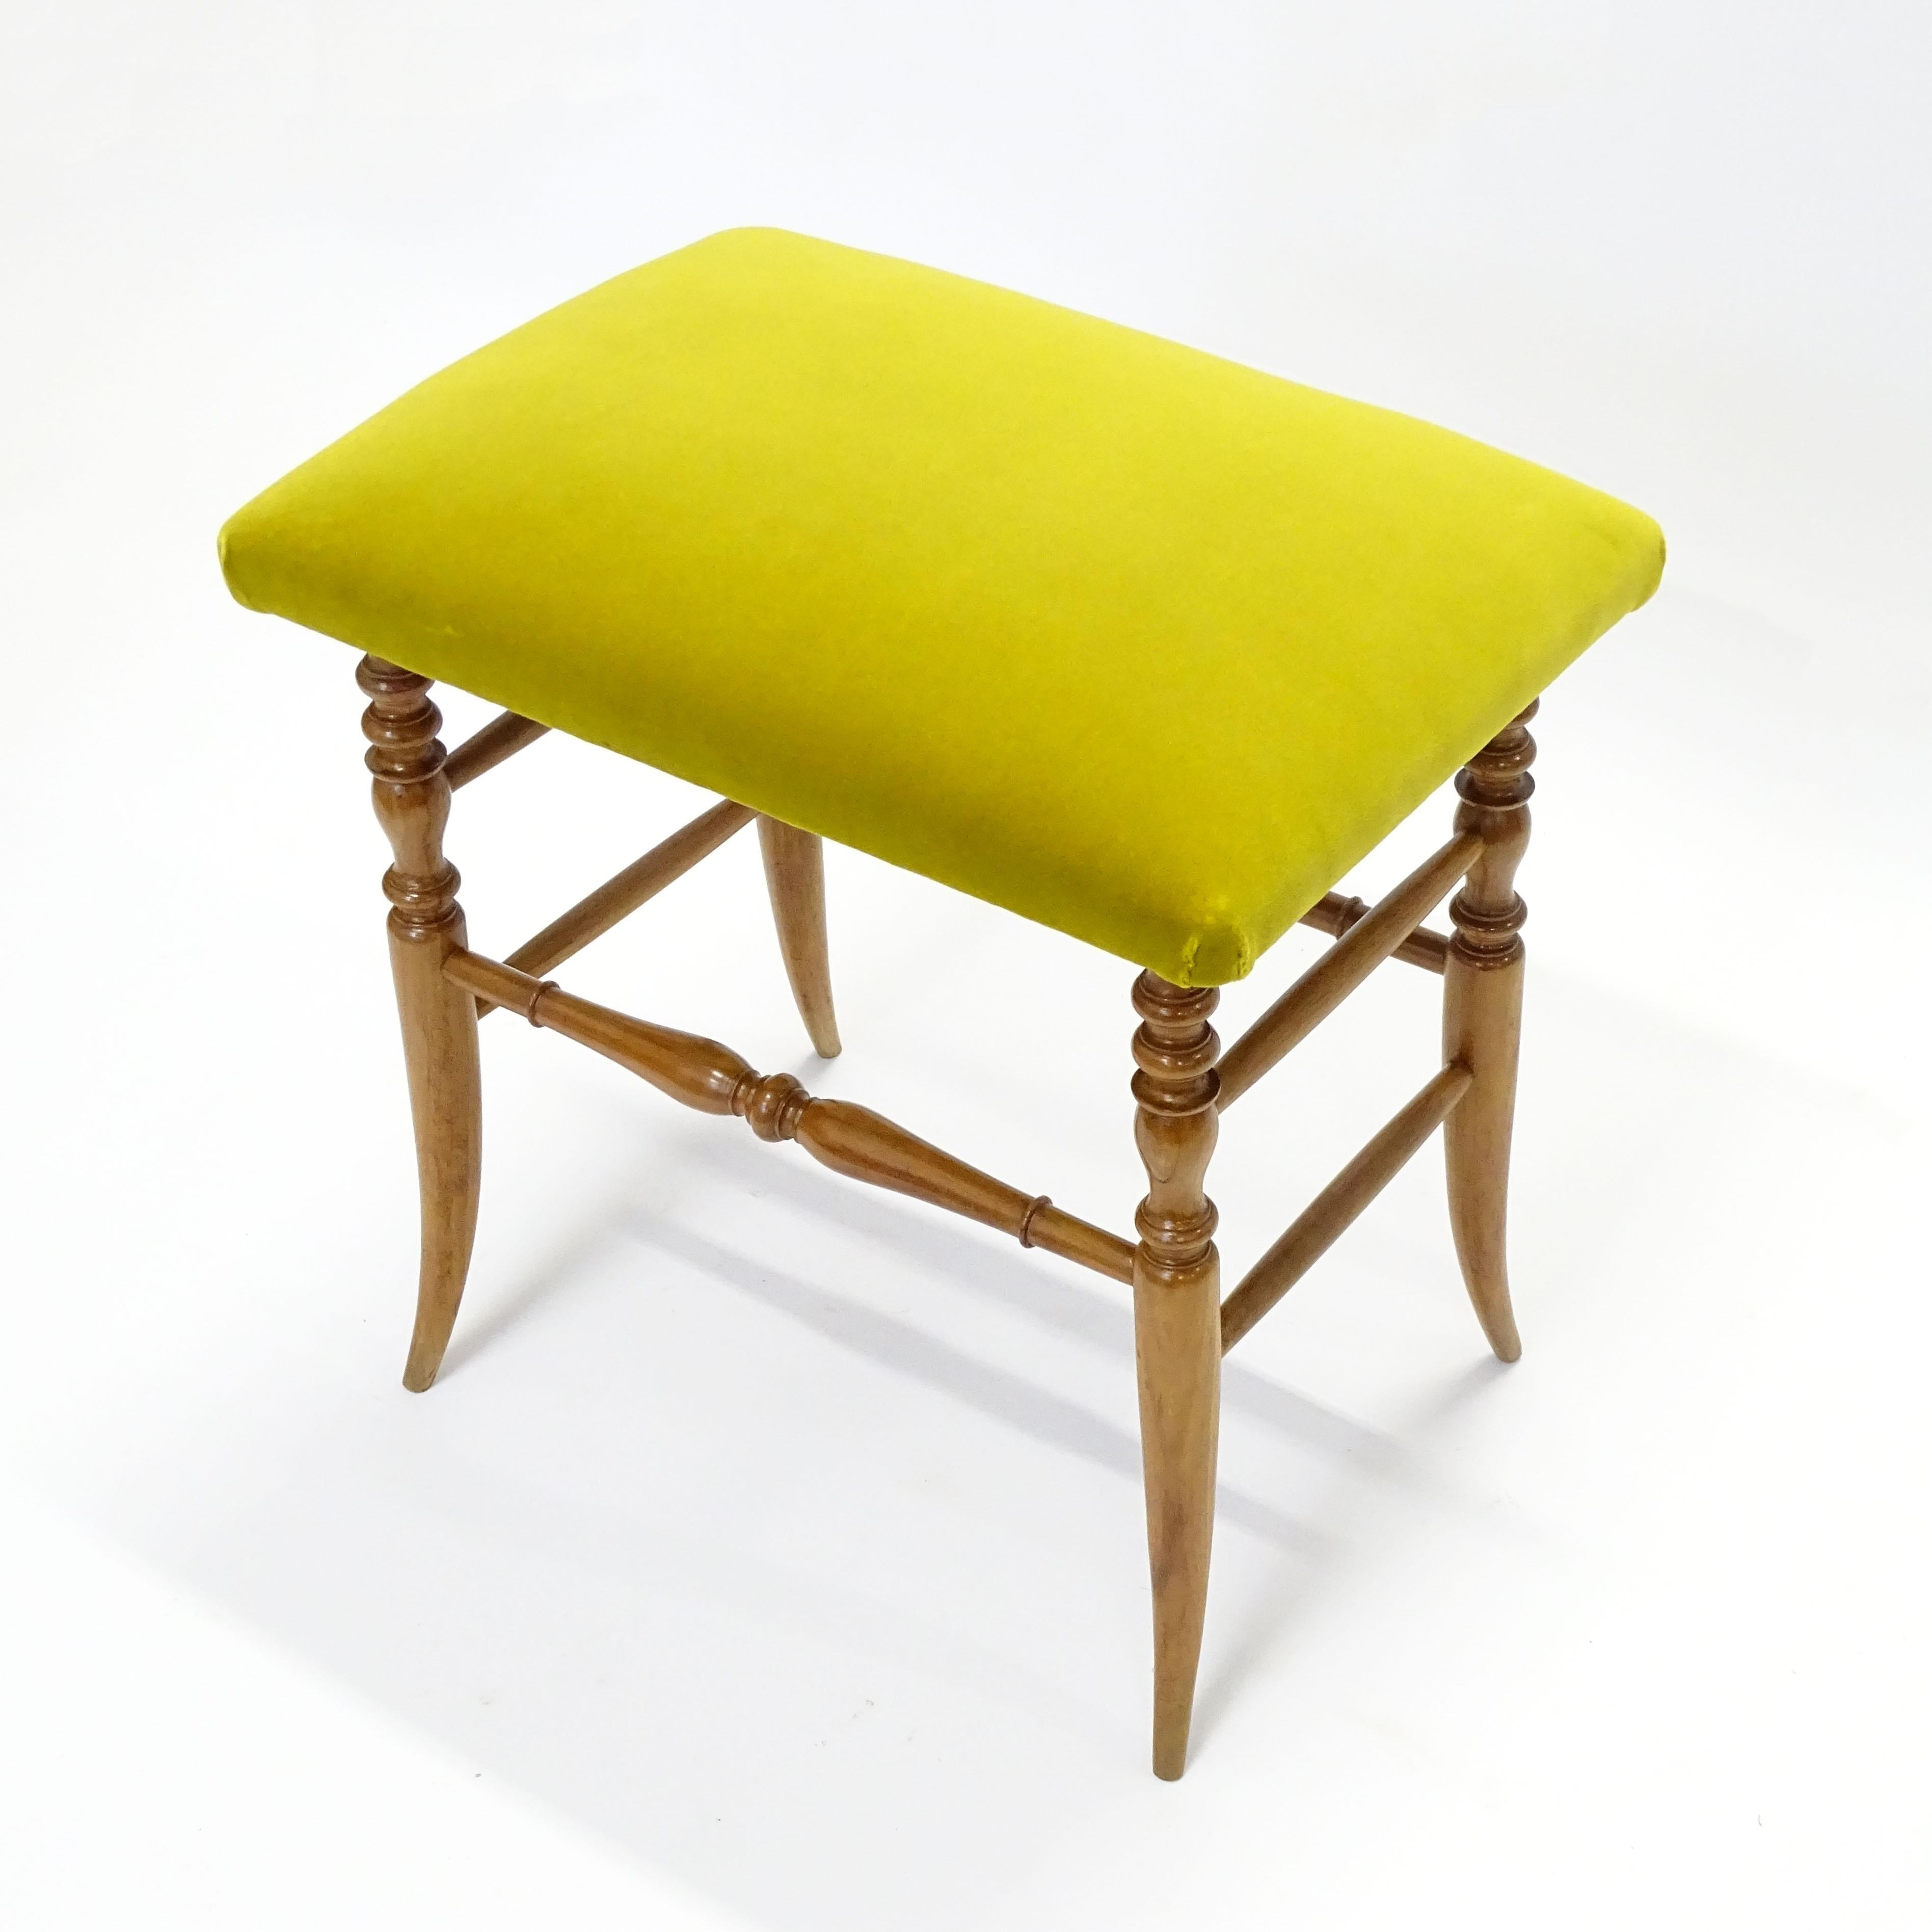 Italian 1950s Chiavarina Wooden Stool with Yellow Velvet Upholstery In Good Condition For Sale In Milan, IT